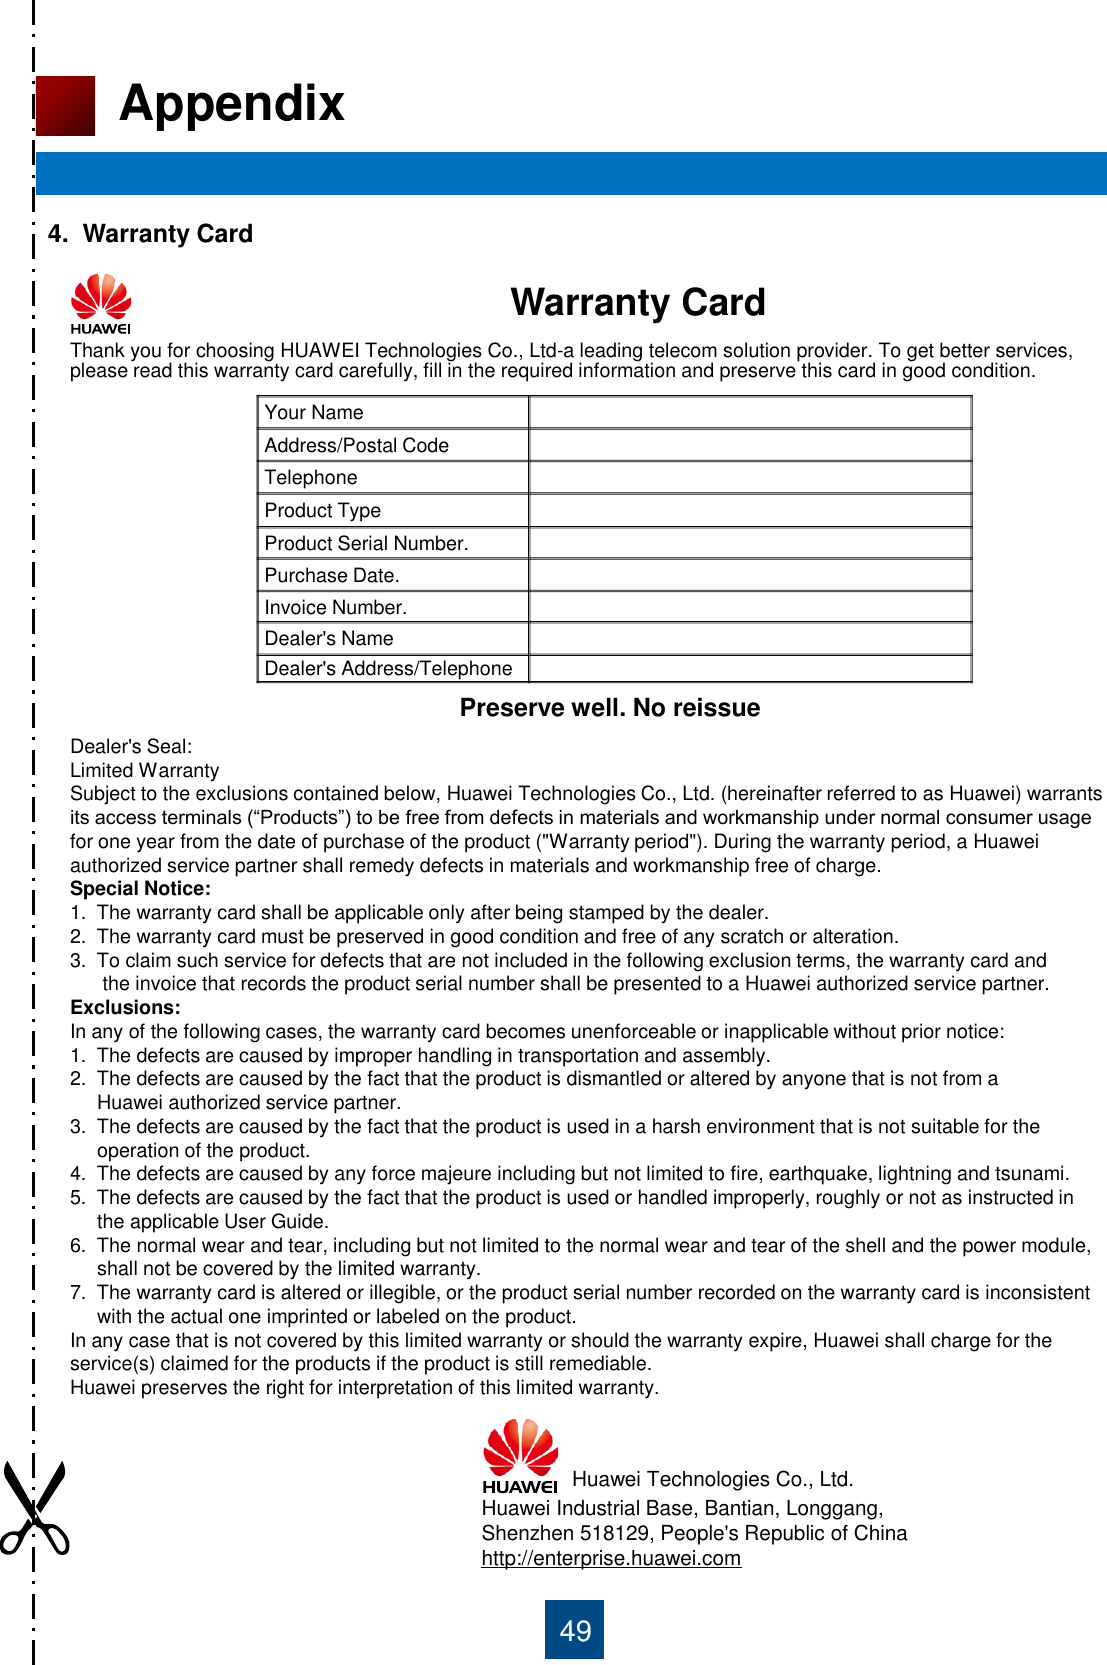 49 Appendix 4.  Warranty Card                                              Warranty Card Thank you for choosing HUAWEI Technologies Co., Ltd-a leading telecom solution provider. To get better services, please read this warranty card carefully, fill in the required information and preserve this card in good condition. Dealer&apos;s Seal: Limited Warranty Subject to the exclusions contained below, Huawei Technologies Co., Ltd. (hereinafter referred to as Huawei) warrants its access terminals (“Products”) to be free from defects in materials and workmanship under normal consumer usage for one year from the date of purchase of the product (&quot;Warranty period&quot;). During the warranty period, a Huawei authorized service partner shall remedy defects in materials and workmanship free of charge. Special Notice: 1.  The warranty card shall be applicable only after being stamped by the dealer. 2.  The warranty card must be preserved in good condition and free of any scratch or alteration. 3.  To claim such service for defects that are not included in the following exclusion terms, the warranty card and        the invoice that records the product serial number shall be presented to a Huawei authorized service partner. Exclusions: In any of the following cases, the warranty card becomes unenforceable or inapplicable without prior notice: 1.  The defects are caused by improper handling in transportation and assembly. 2.  The defects are caused by the fact that the product is dismantled or altered by anyone that is not from a      Huawei authorized service partner. 3.  The defects are caused by the fact that the product is used in a harsh environment that is not suitable for the       operation of the product. 4.  The defects are caused by any force majeure including but not limited to fire, earthquake, lightning and tsunami. 5.  The defects are caused by the fact that the product is used or handled improperly, roughly or not as instructed in       the applicable User Guide. 6.  The normal wear and tear, including but not limited to the normal wear and tear of the shell and the power module,      shall not be covered by the limited warranty. 7.  The warranty card is altered or illegible, or the product serial number recorded on the warranty card is inconsistent       with the actual one imprinted or labeled on the product. In any case that is not covered by this limited warranty or should the warranty expire, Huawei shall charge for the service(s) claimed for the products if the product is still remediable.  Huawei preserves the right for interpretation of this limited warranty. Huawei Technologies Co., Ltd. Huawei Industrial Base, Bantian, Longgang, Shenzhen 518129, People&apos;s Republic of China http://enterprise.huawei.com Your Name Address/Postal Code Telephone Product Type Product Serial Number. Purchase Date. Invoice Number. Dealer&apos;s Name Dealer&apos;s Address/Telephone Preserve well. No reissue 